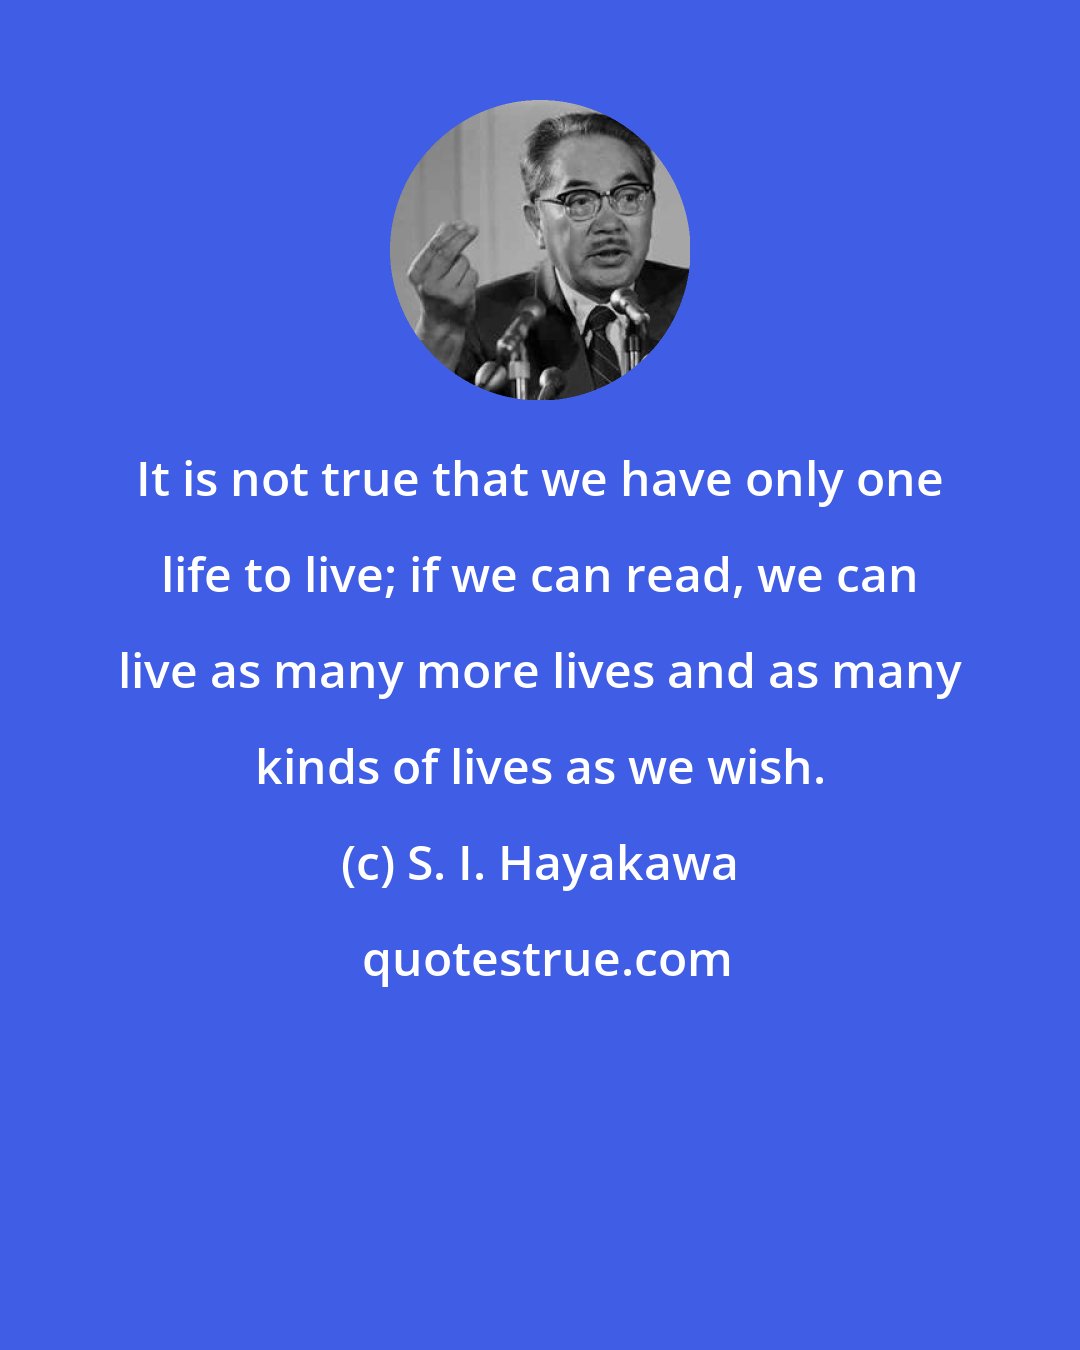 S. I. Hayakawa: It is not true that we have only one life to live; if we can read, we can live as many more lives and as many kinds of lives as we wish.